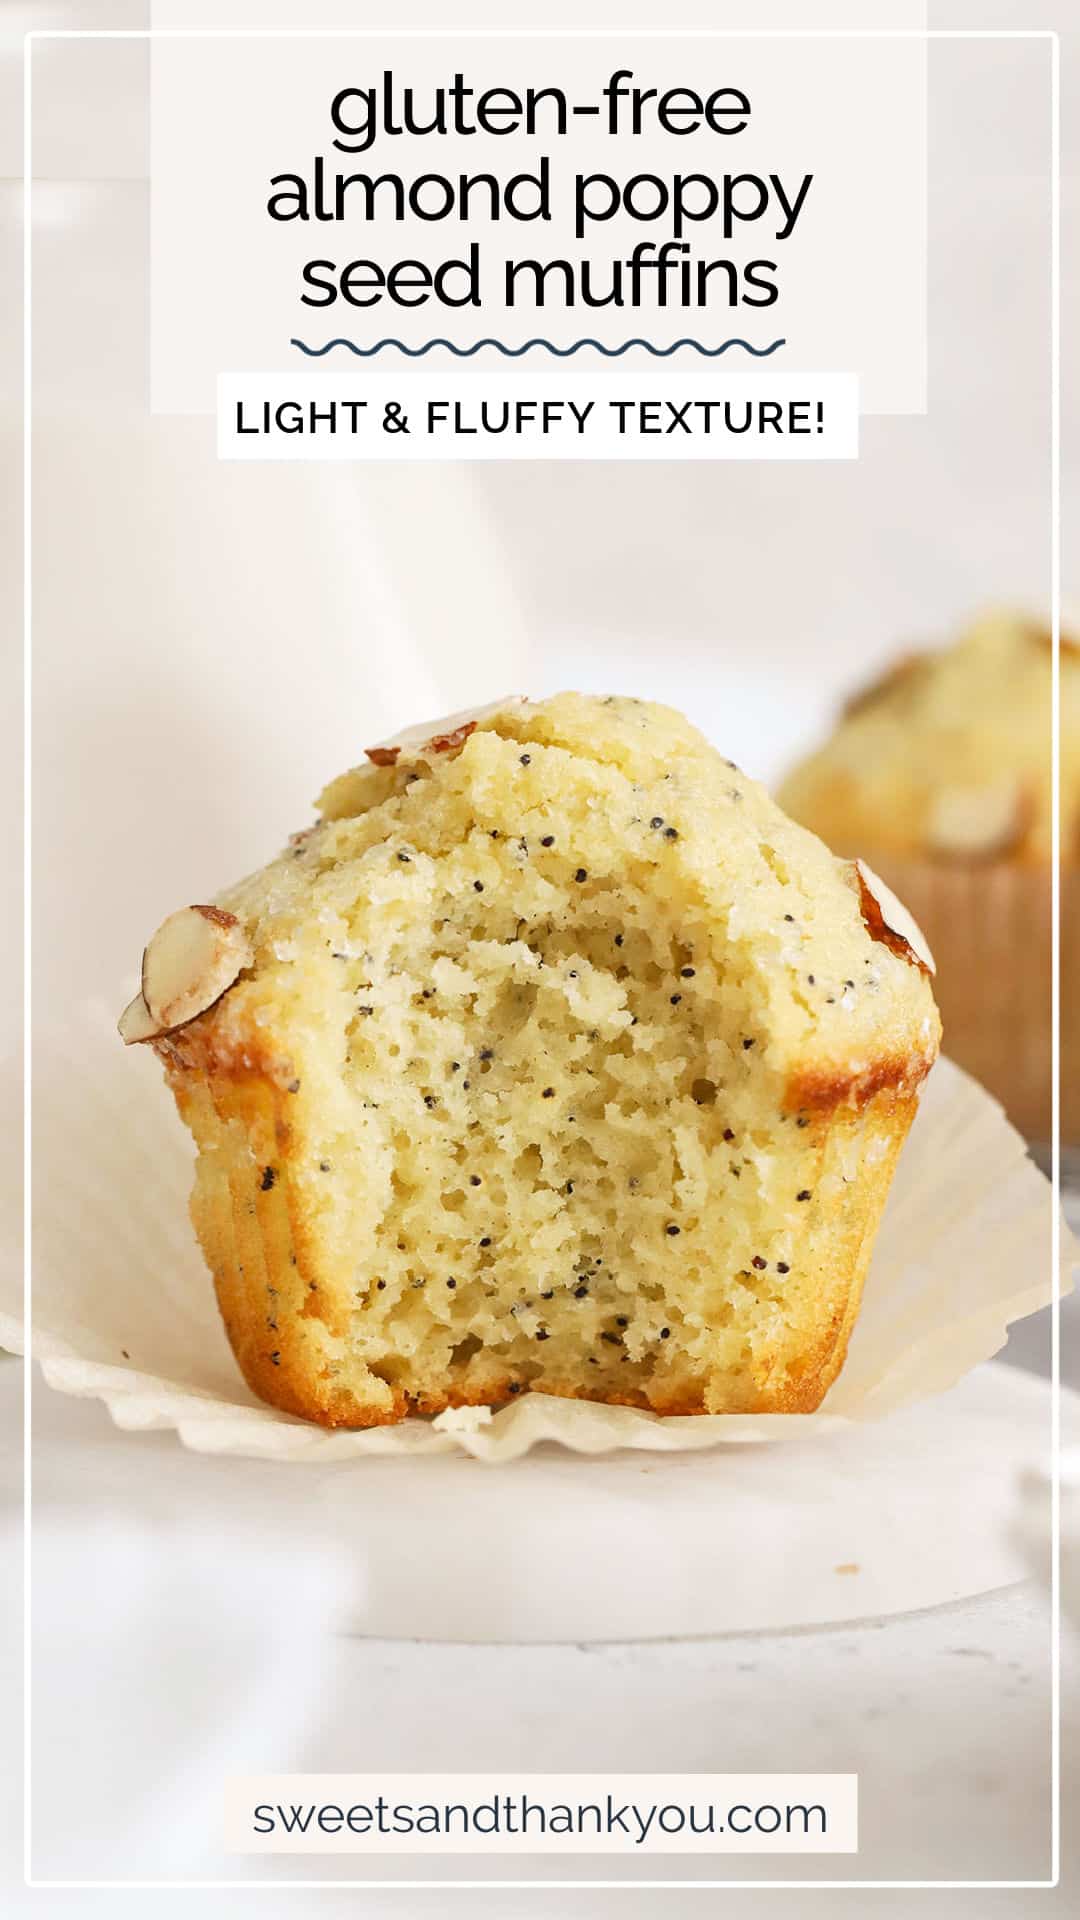 This gluten-free almond poppy seed muffins recipe is made from scratch with simple ingredients for BIG flavor. You'll love the fluffy texture! They make a delicious gluten-free breakfast or gluten-free brunch recipe any day. (Plus, don't miss our tips for ultra-fluffy gluten-free muffins every time.!)